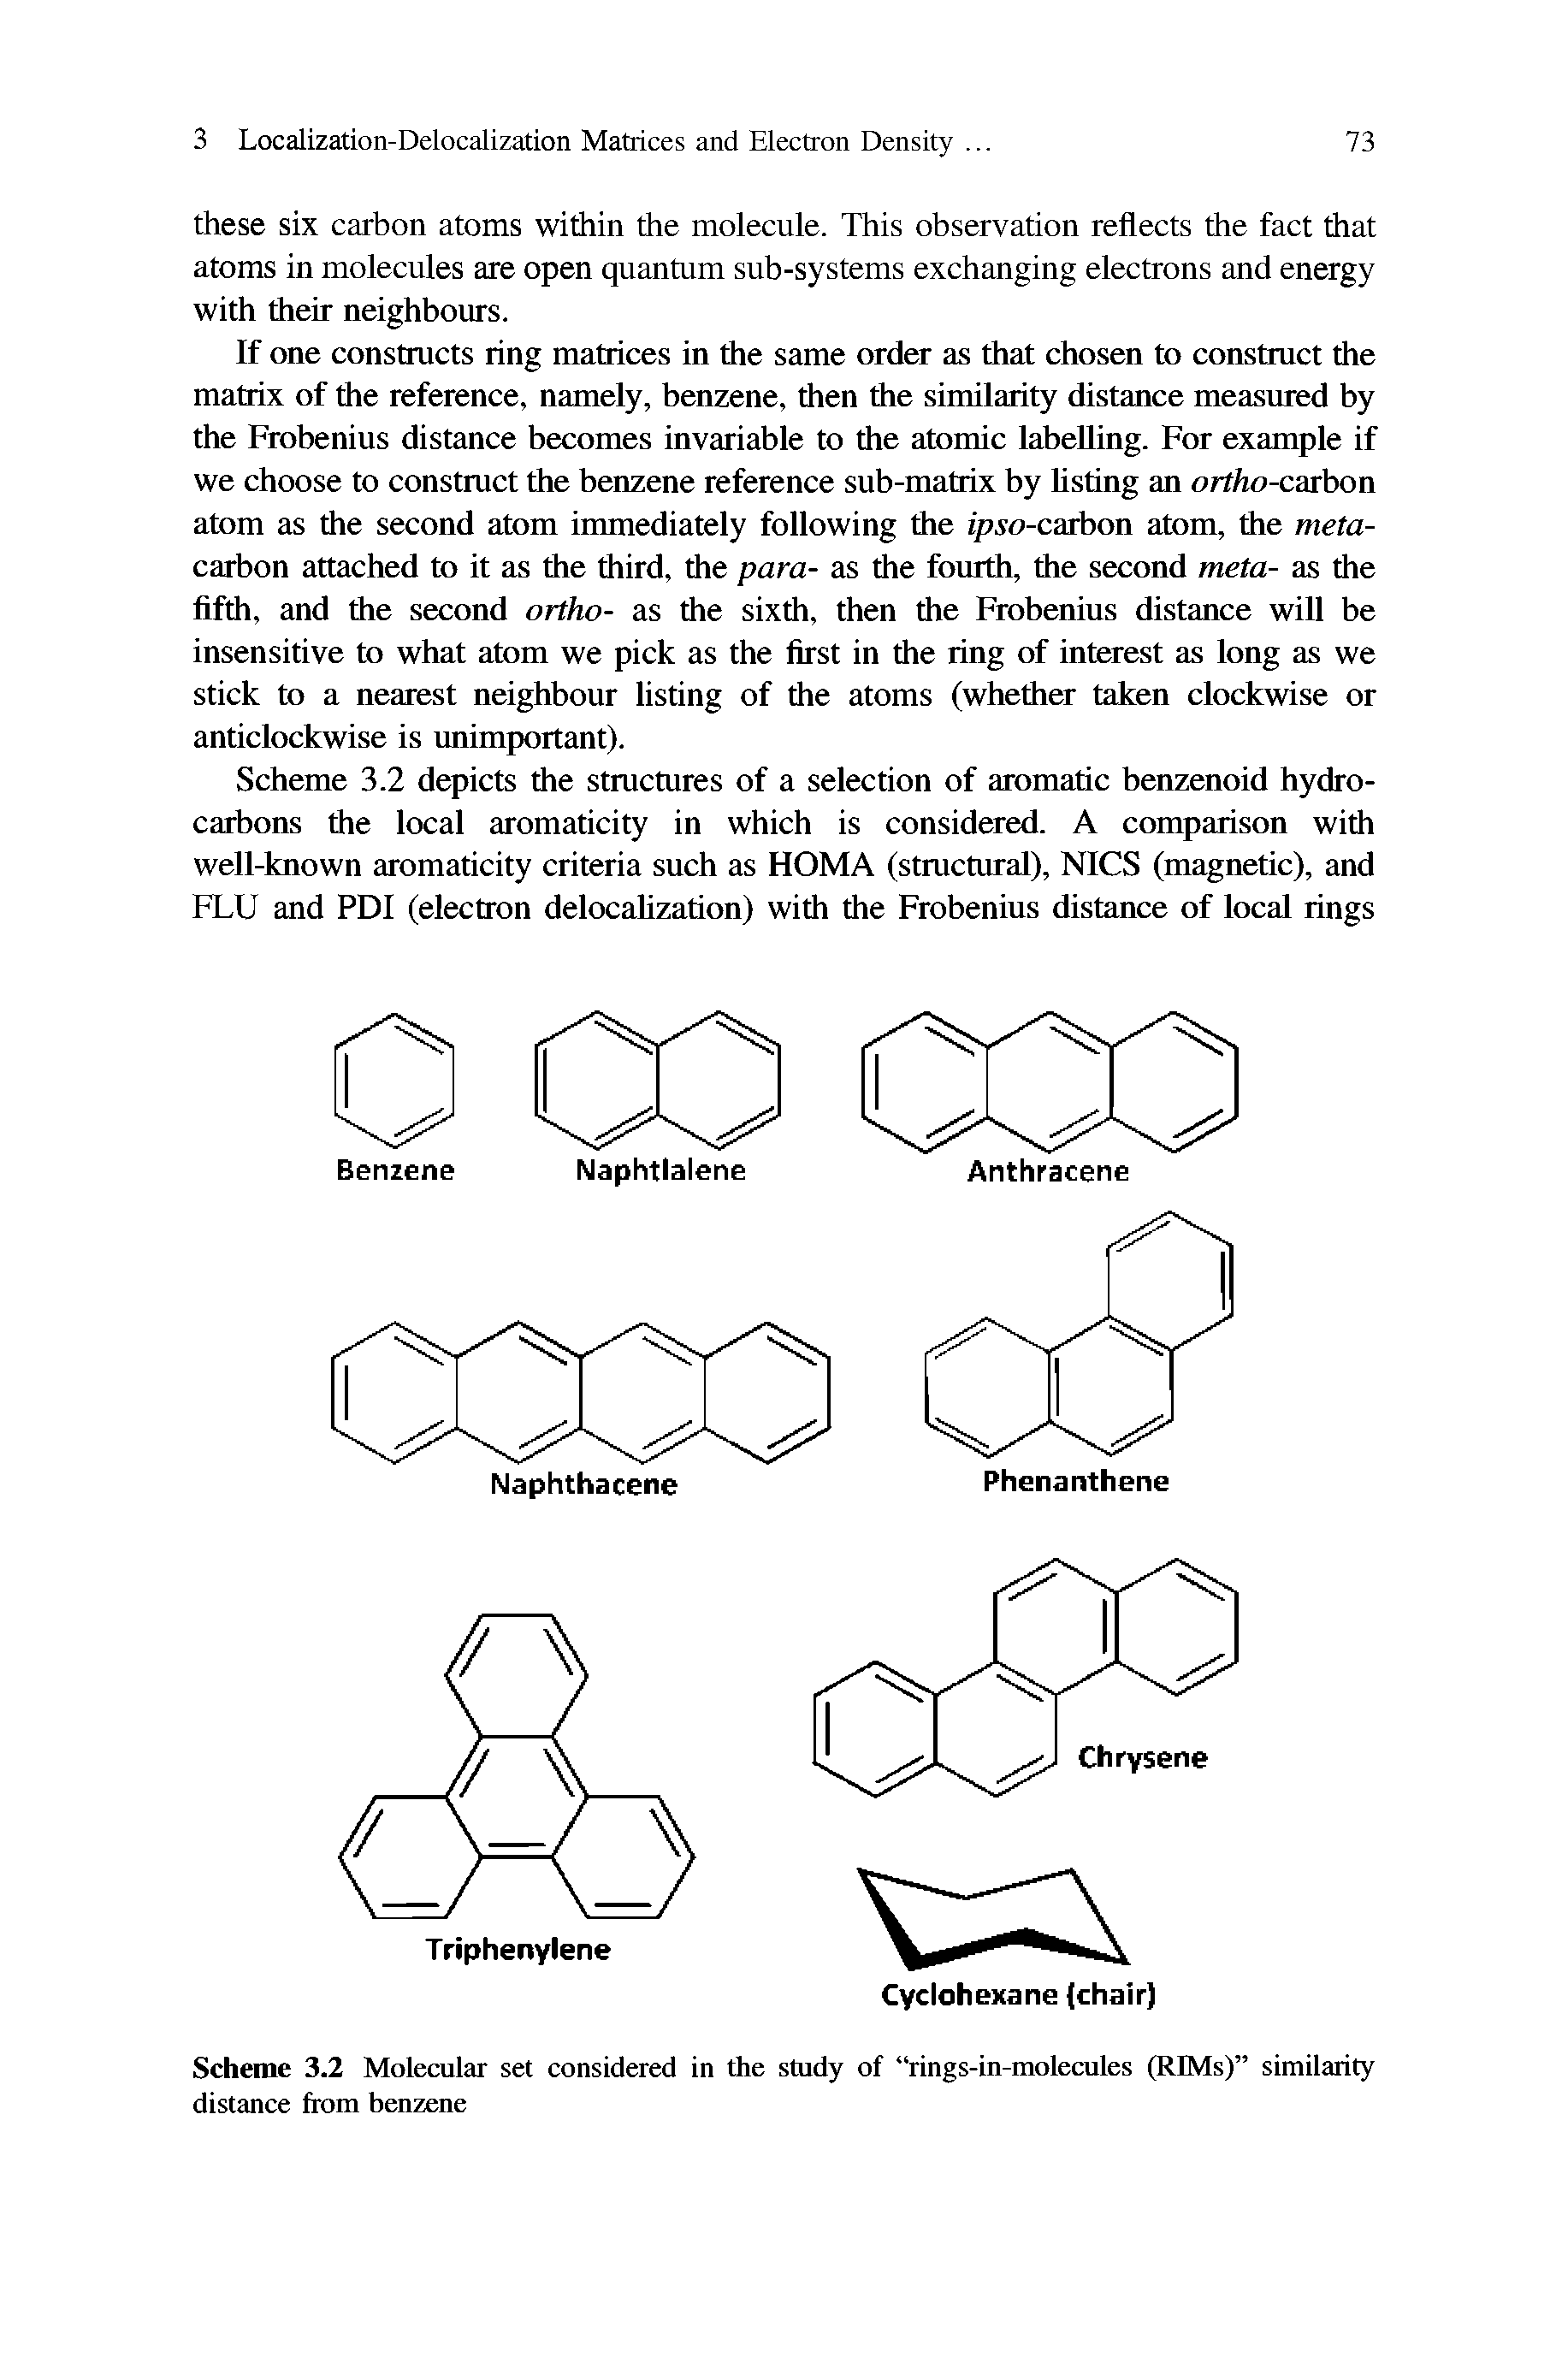 Scheme 3.2 Molecular set considered in the study of rings-in-molecules (RIMs) similarity distance from benzene...